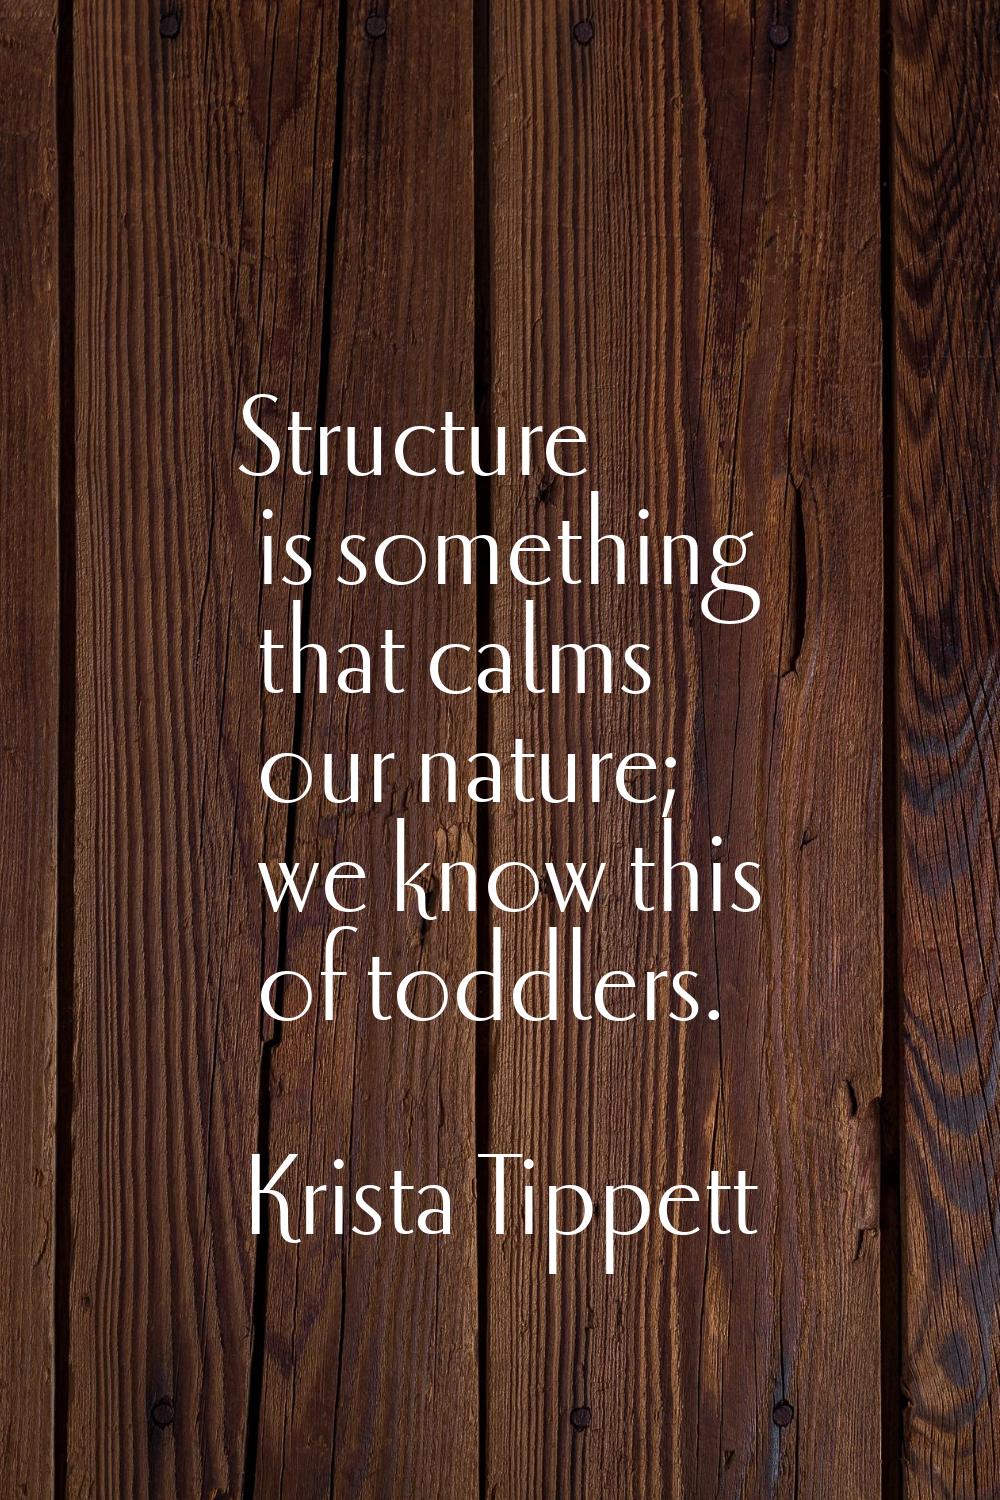 Structure is something that calms our nature; we know this of toddlers.